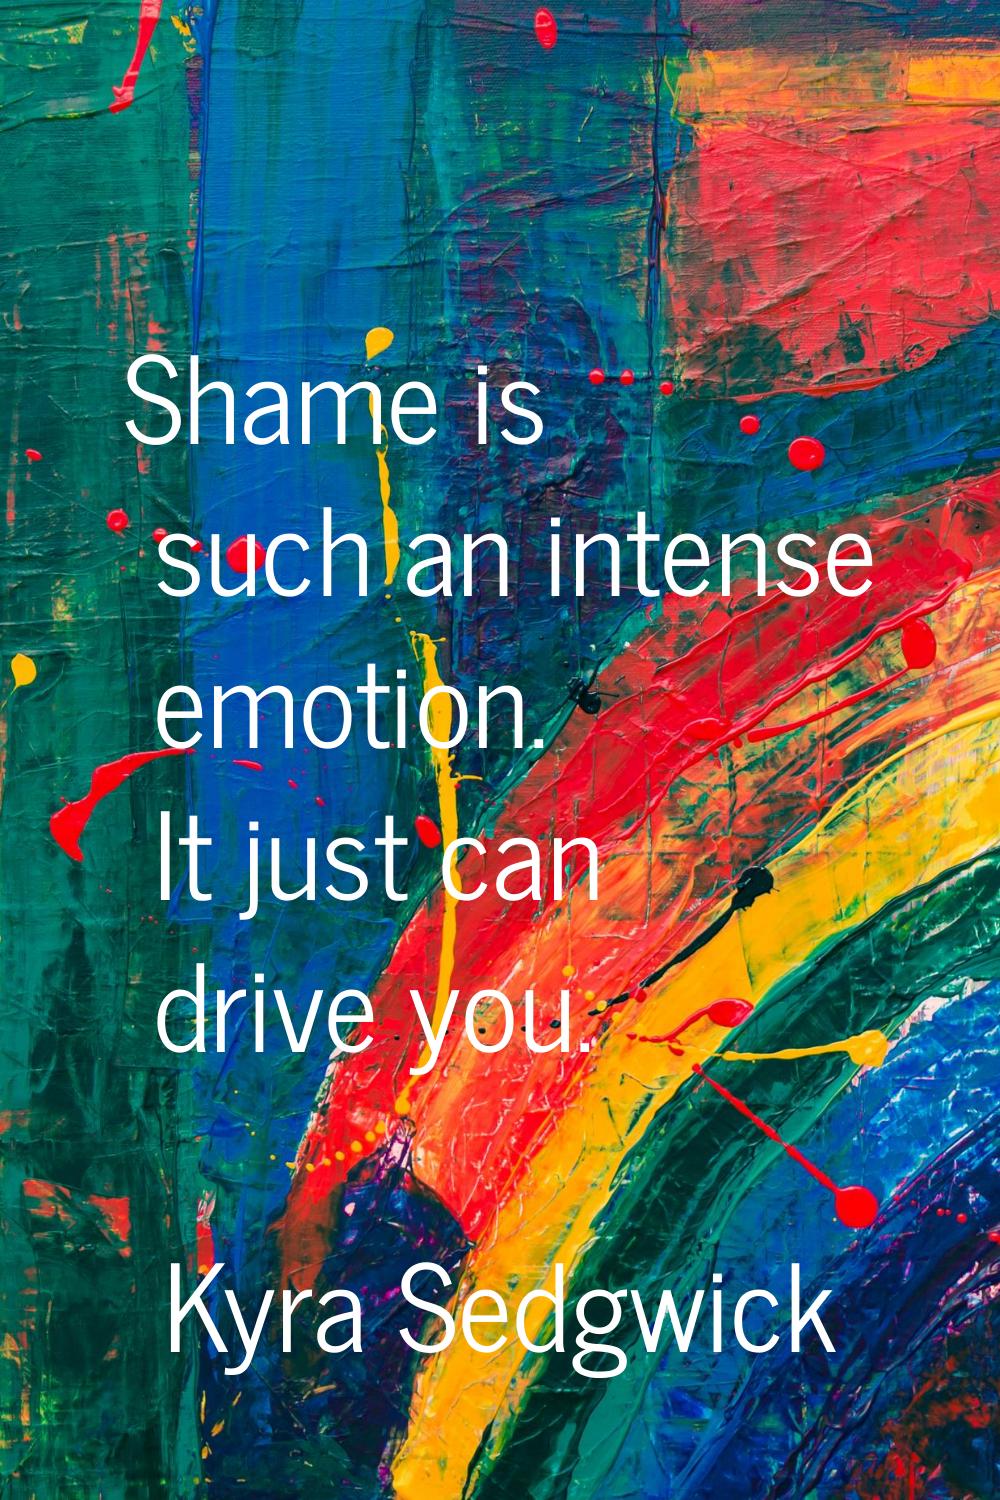 Shame is such an intense emotion. It just can drive you.